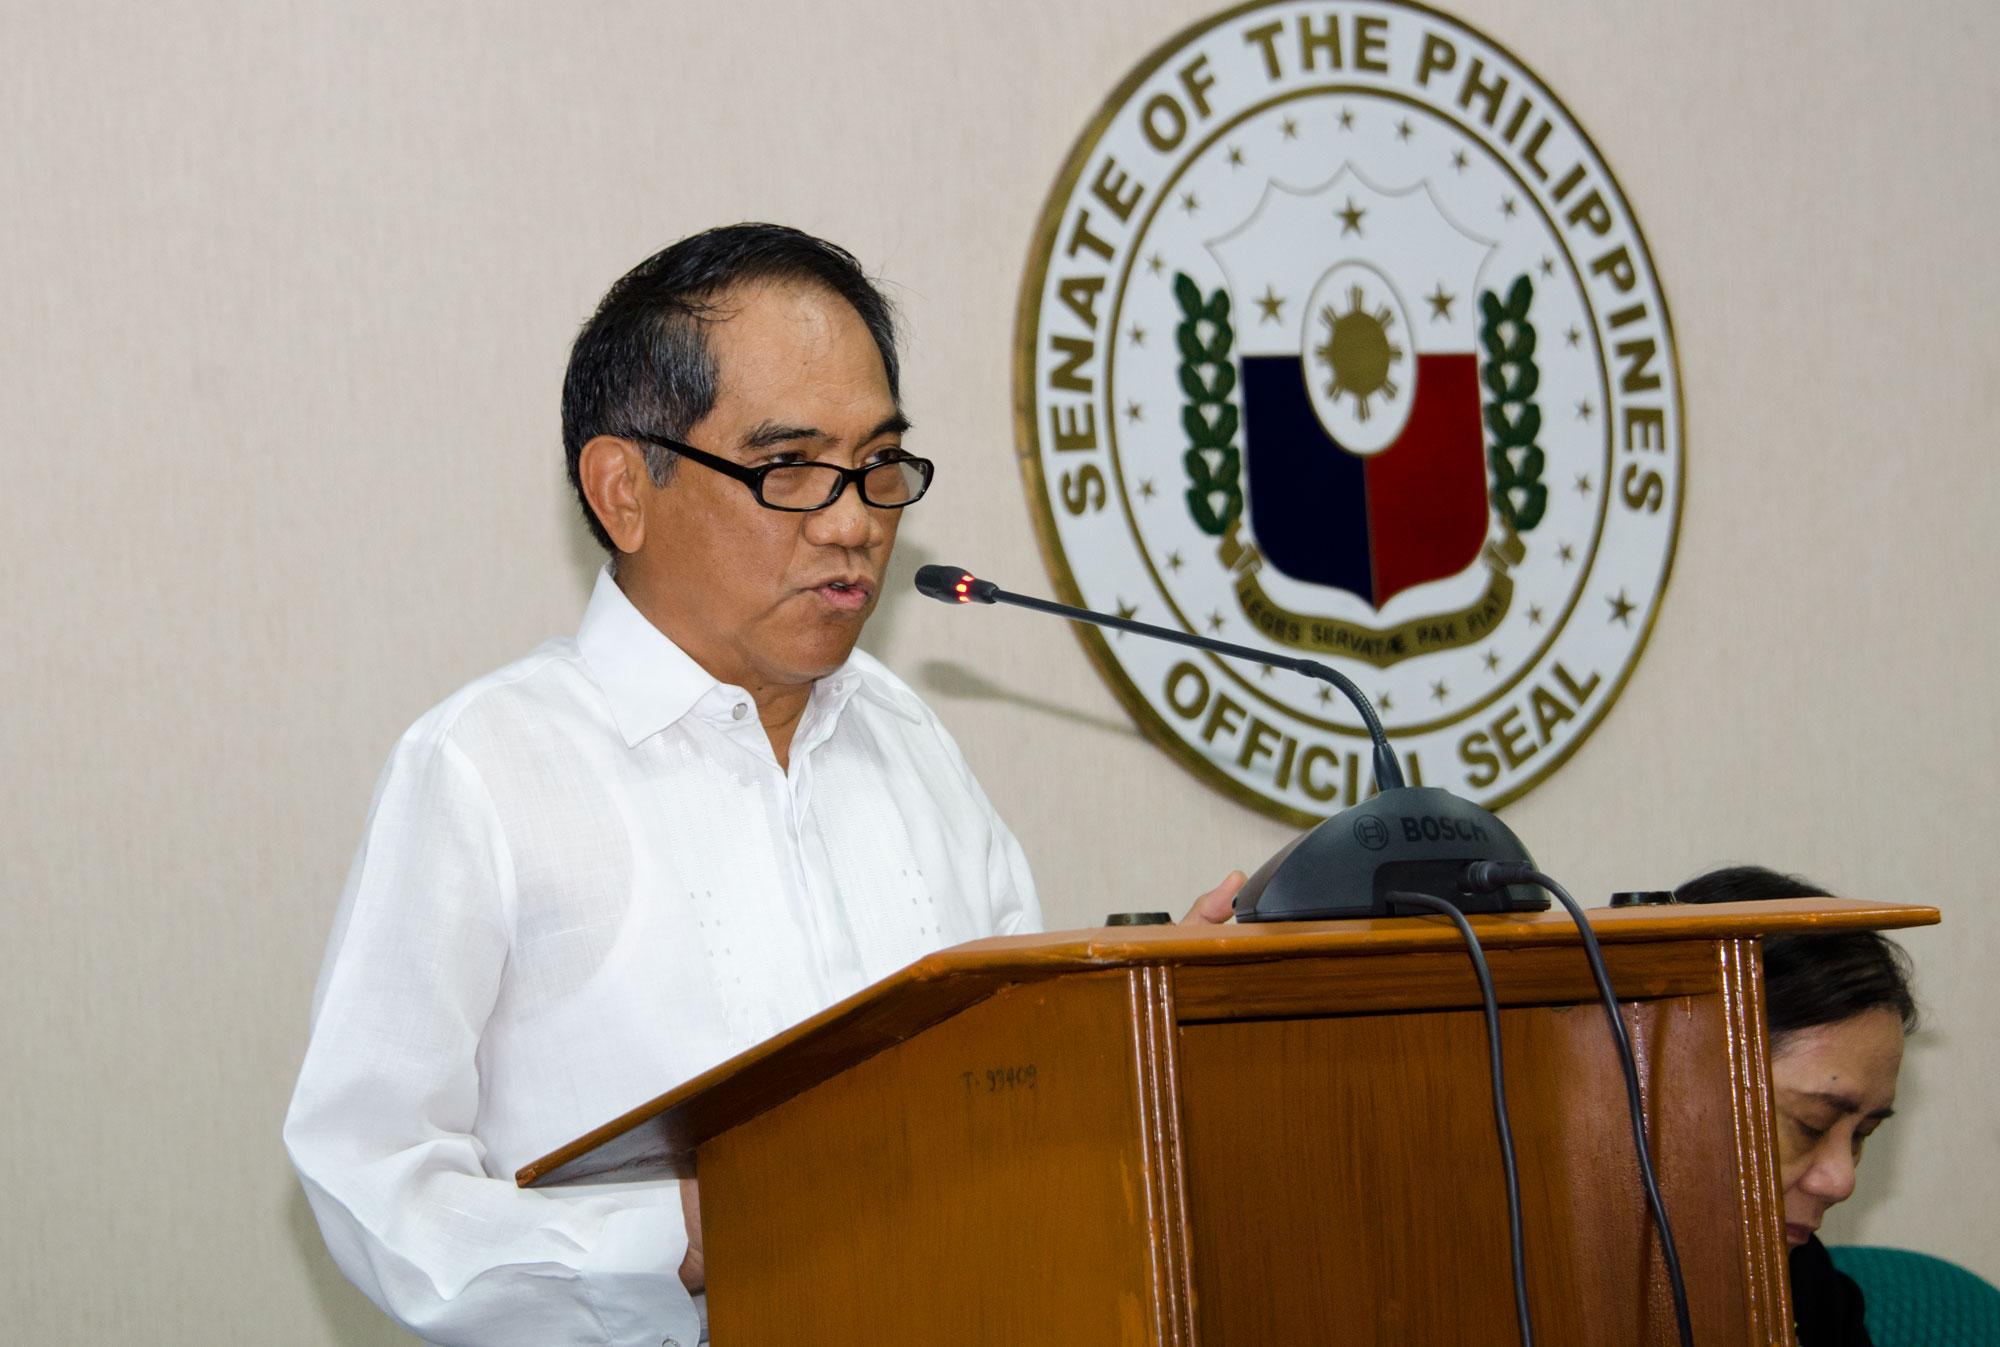 Senate Centennial Lecture Series Assessment Of The Bottom-Up Budgeting Process For FY 2015-GGM_7861.jpg